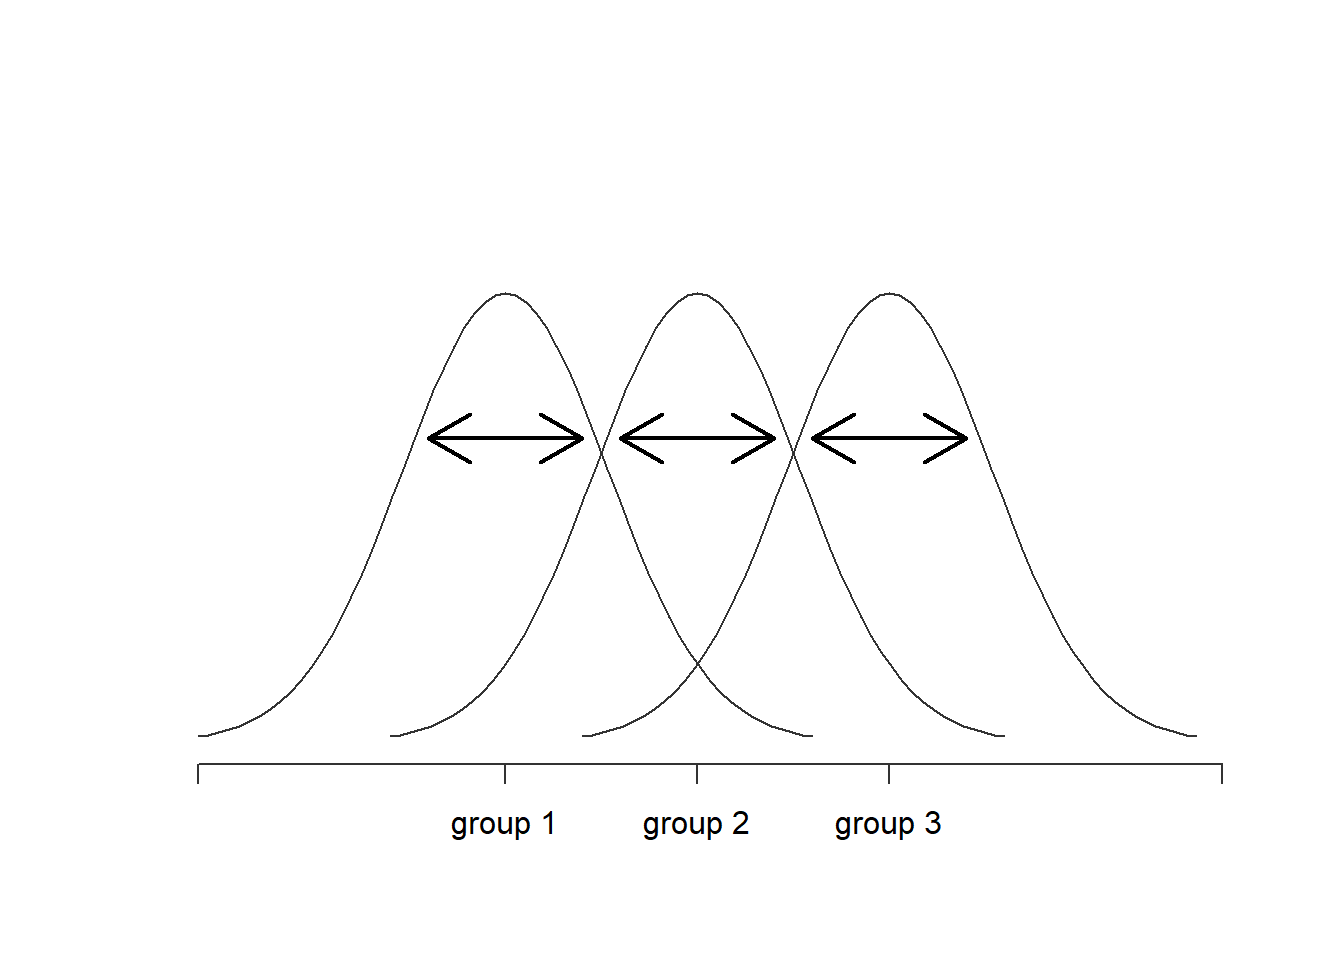 Graphical illustration of  "within groups" variation